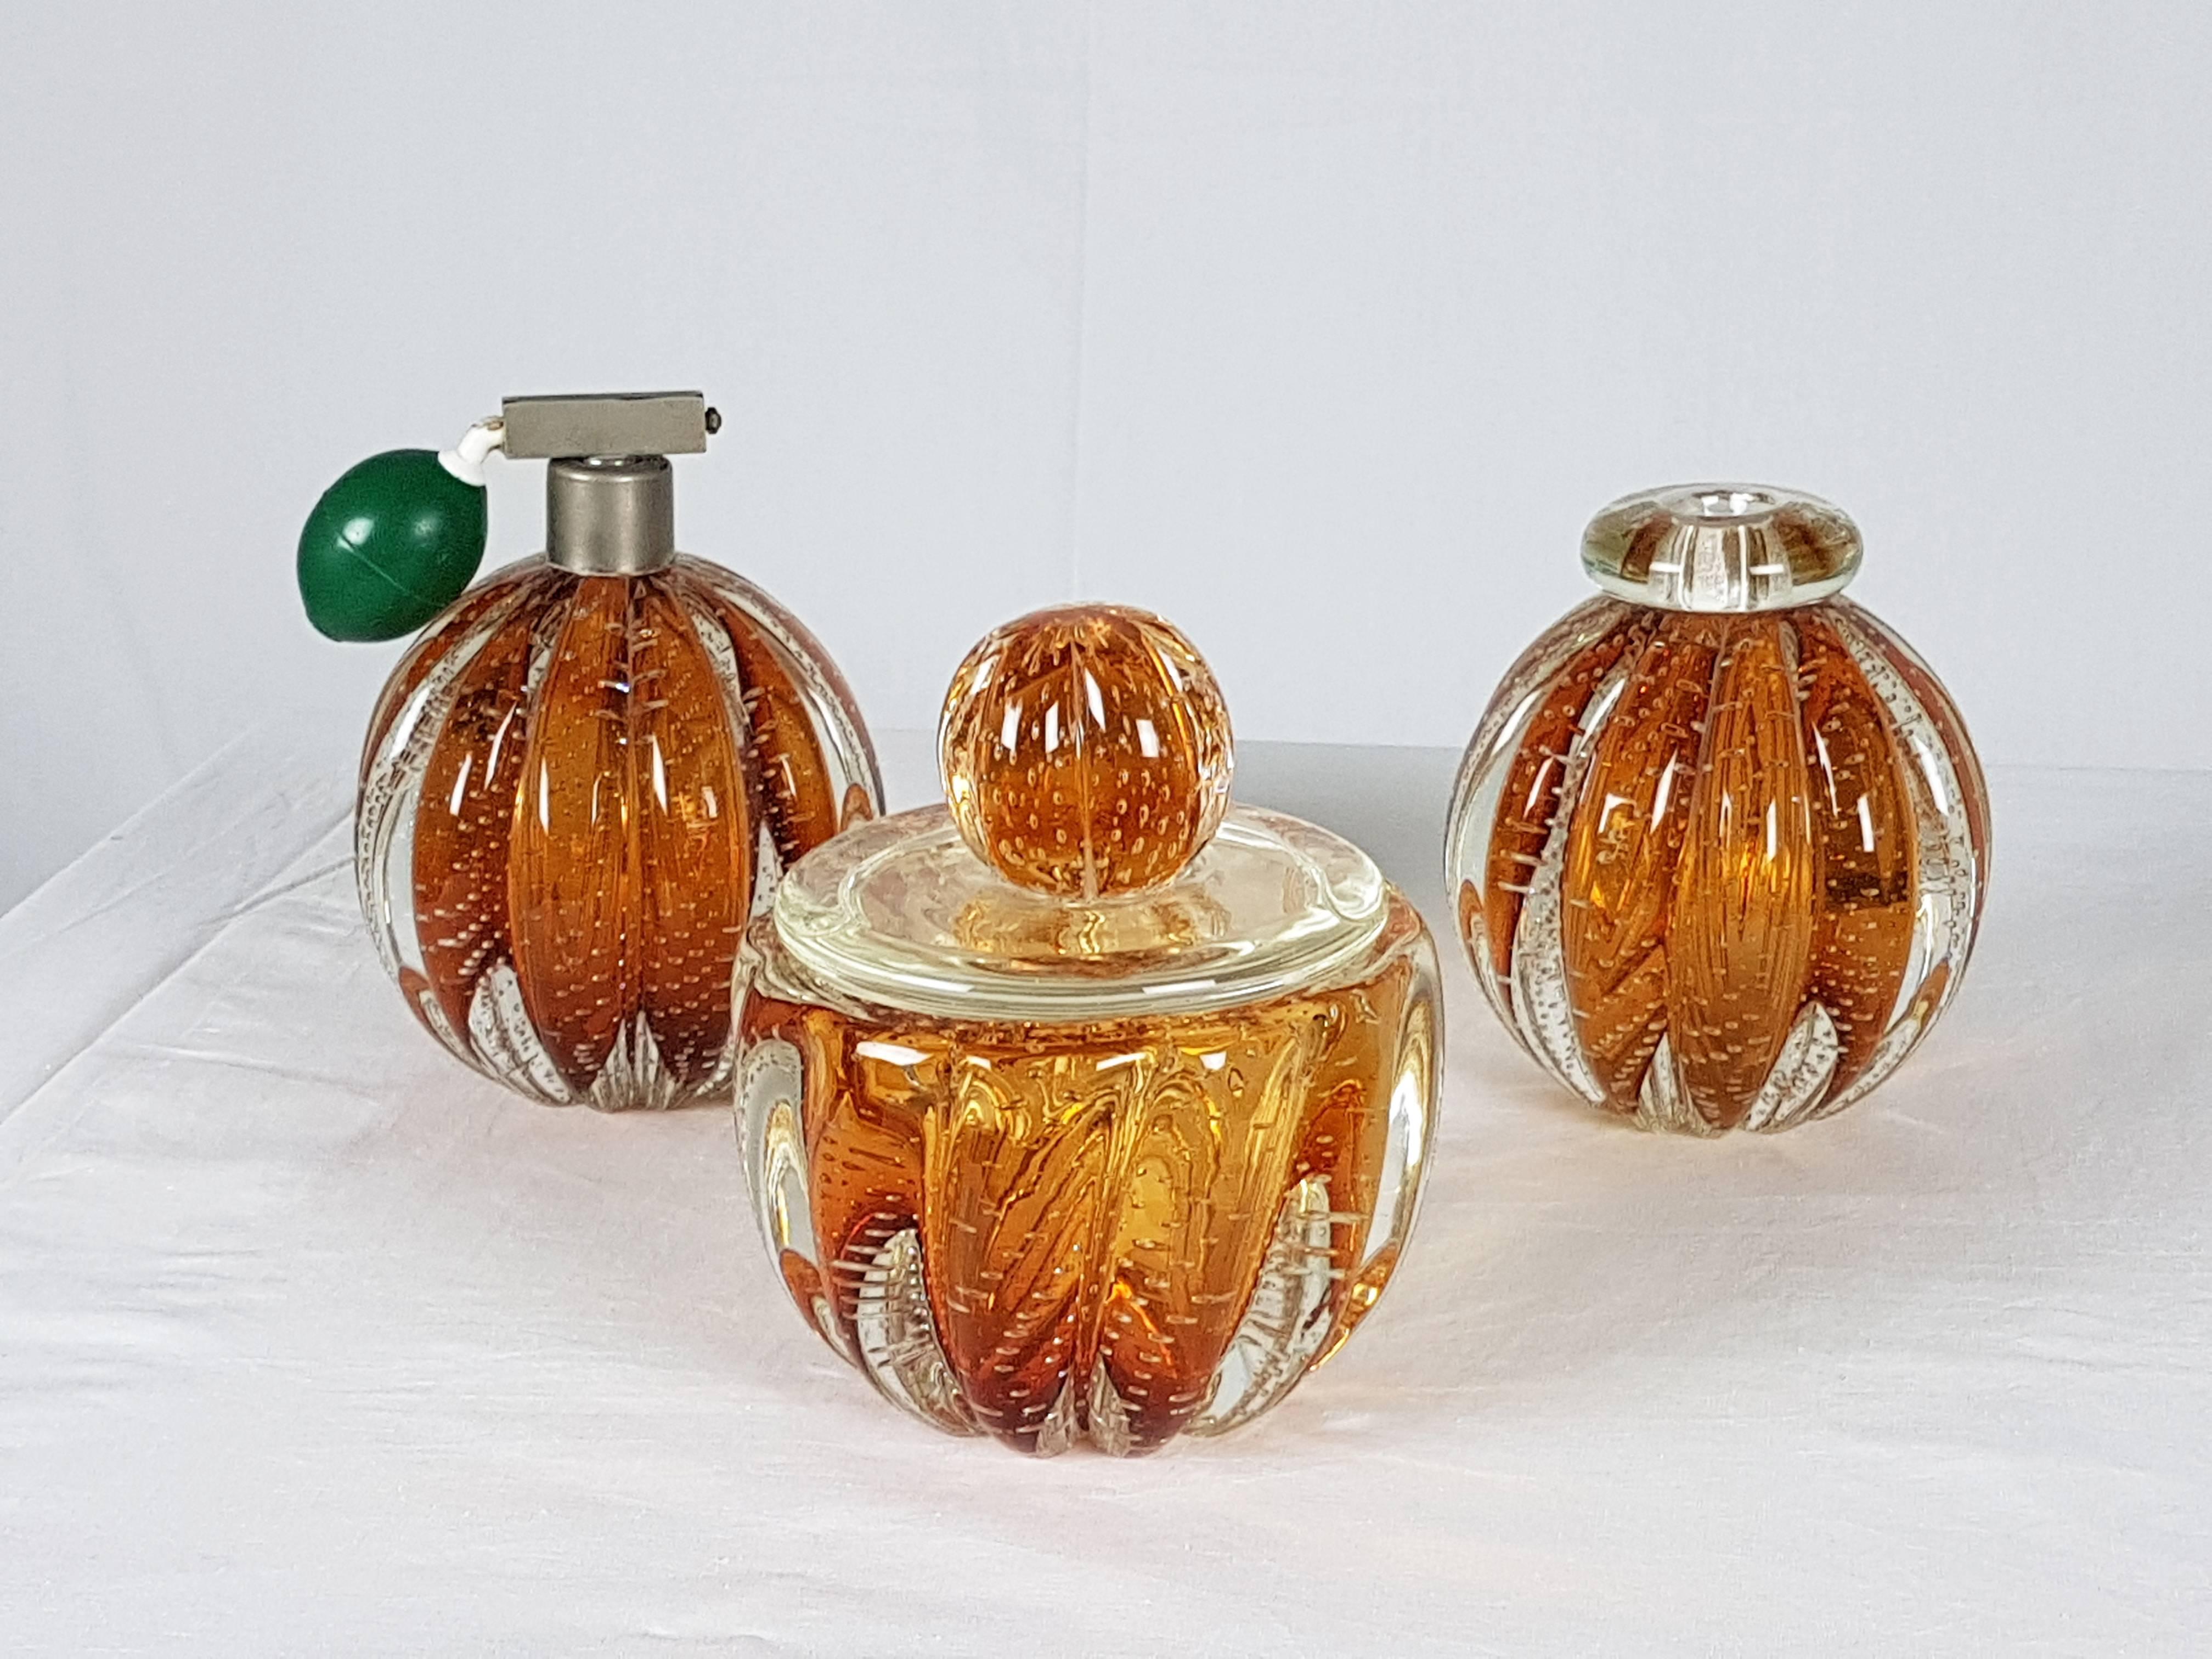 This beautiful set of Italian Murano glass vanity boxes and accessories was manufactured by Seguso Vetri d' Arte in the 1940s. The set is composed by 3 large Murano 